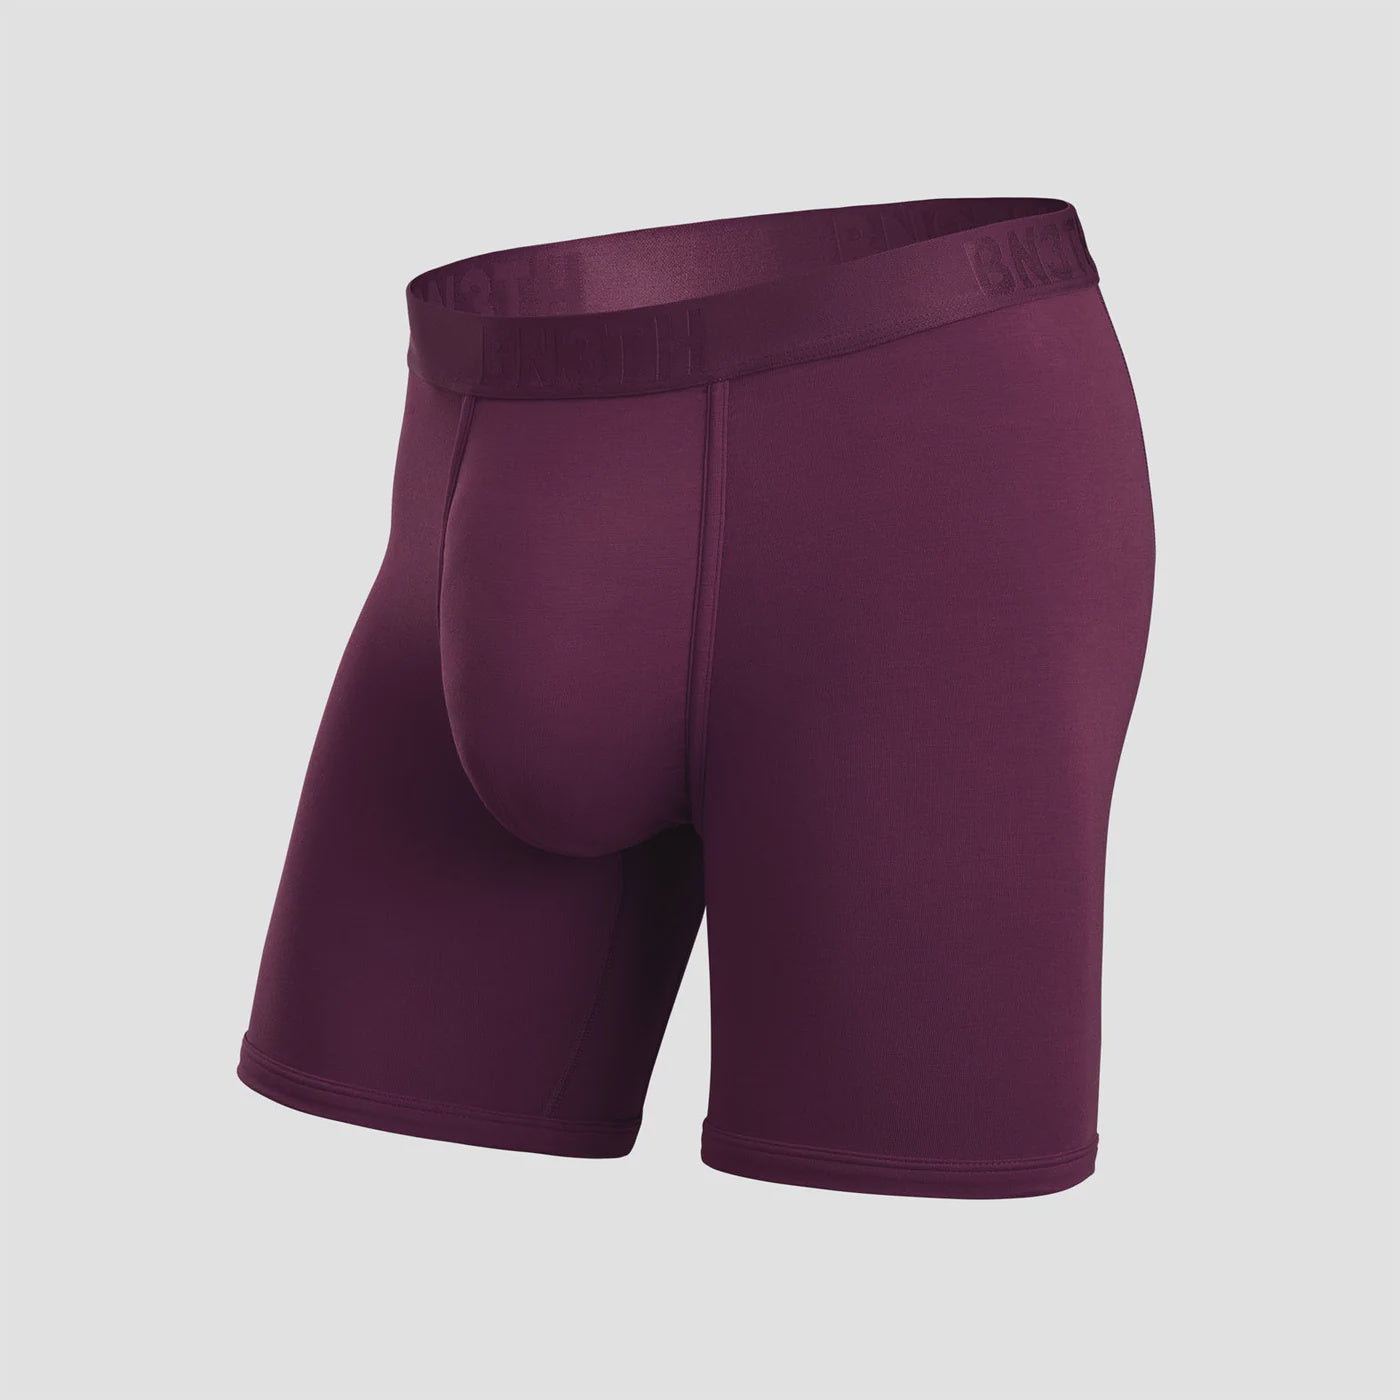 BN3TH - CLASSIC BOXER BRIEF SOLID IN CABERNET